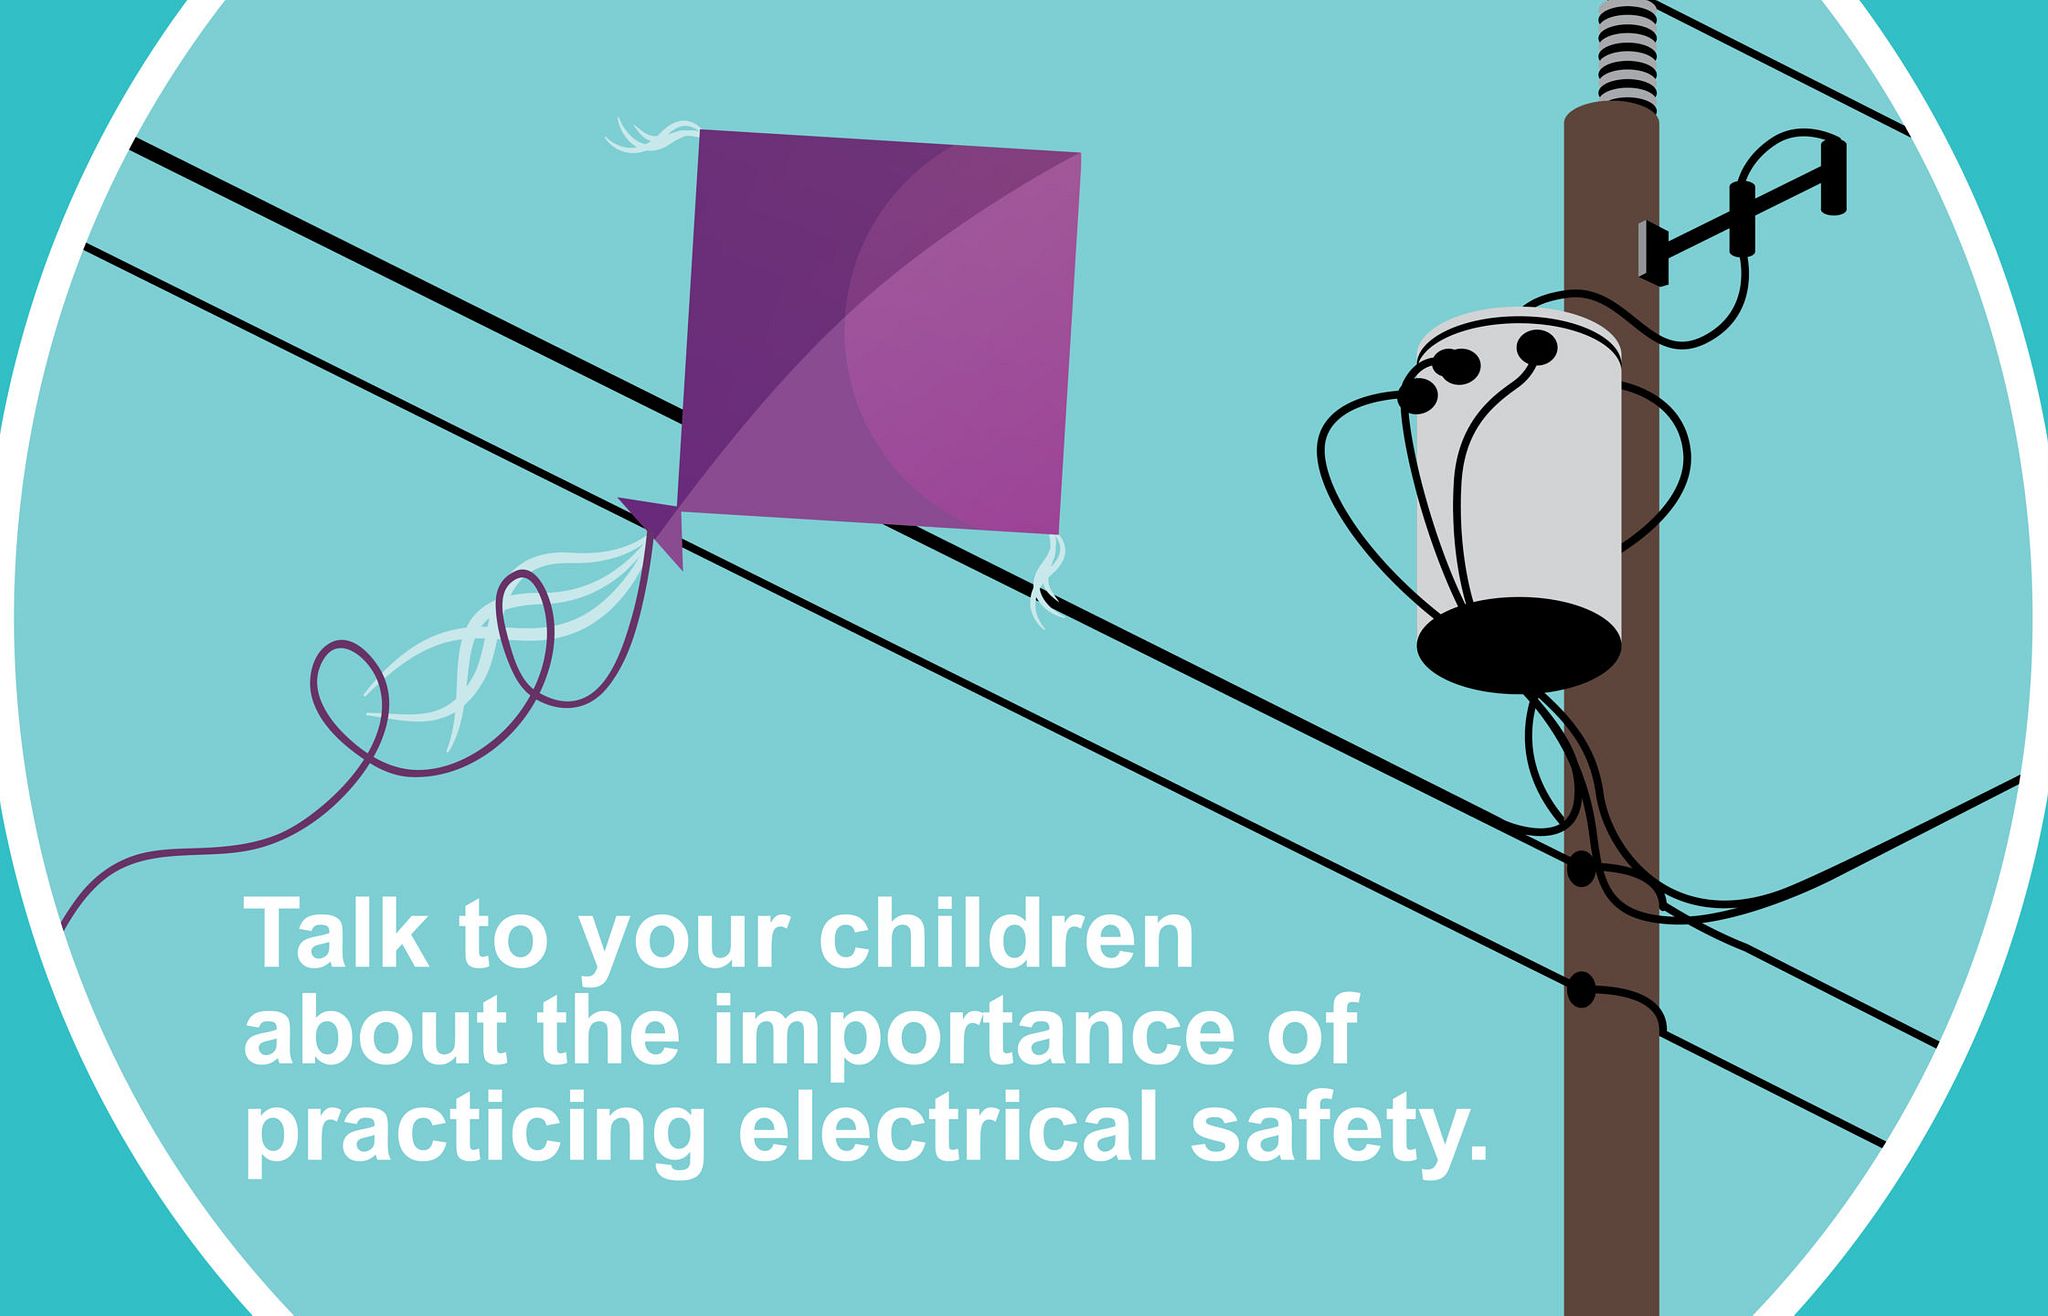 Graphic: Talk to your children about the importance of practicing electrical safety